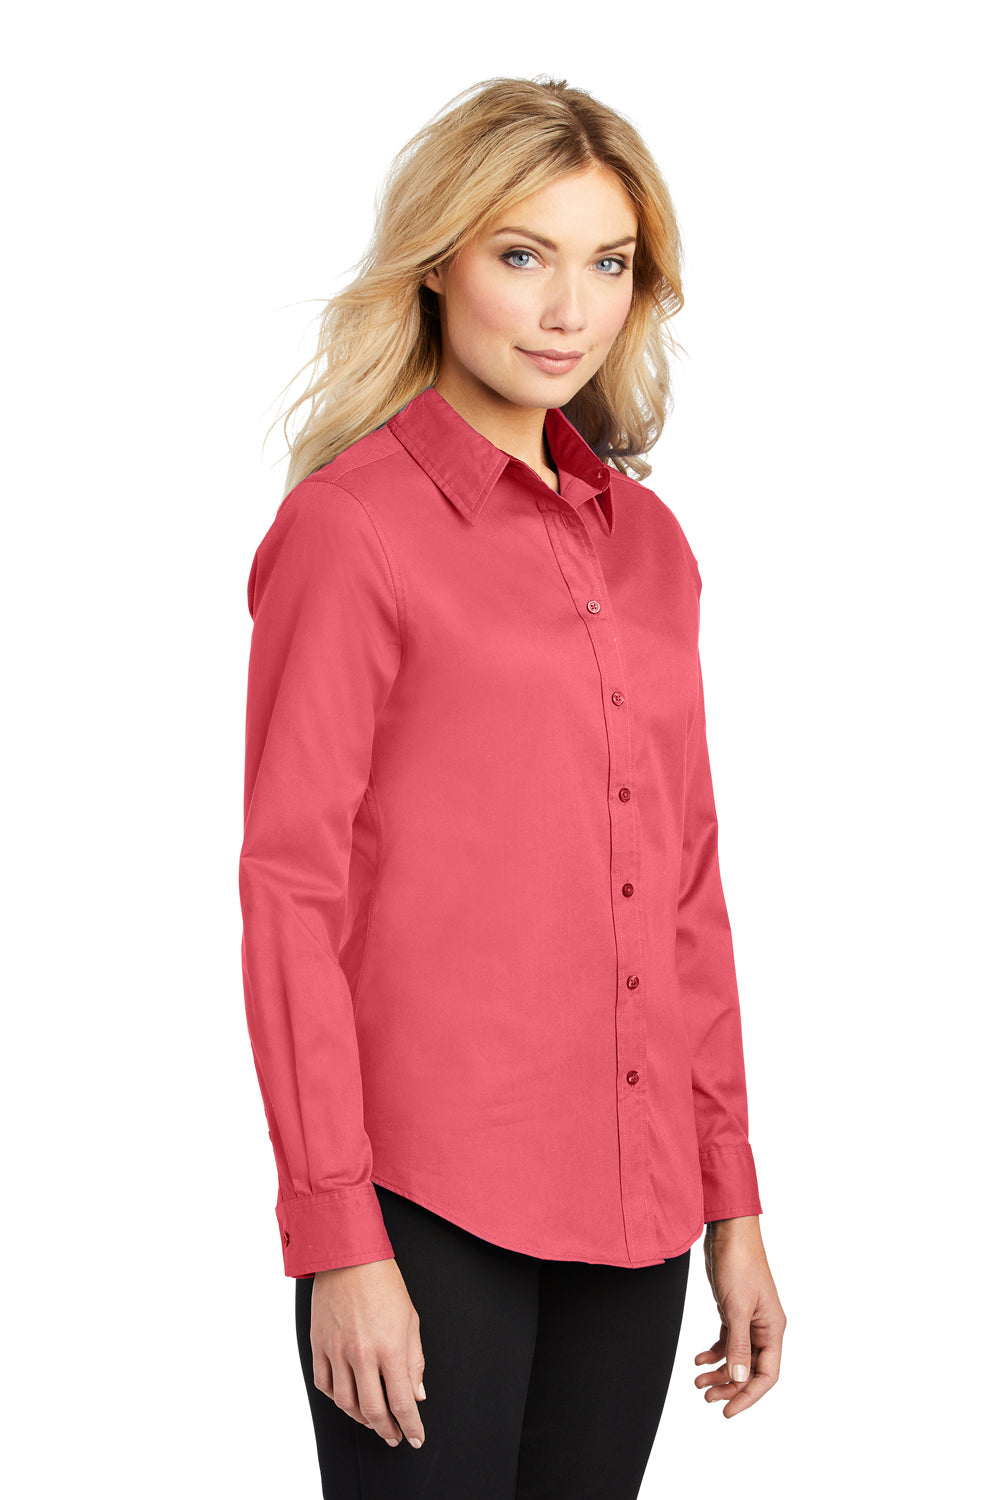 Port Authority L608 Womens Easy Care Wrinkle Resistant Long Sleeve Button Down Shirt Hibiscus Pink 3Q